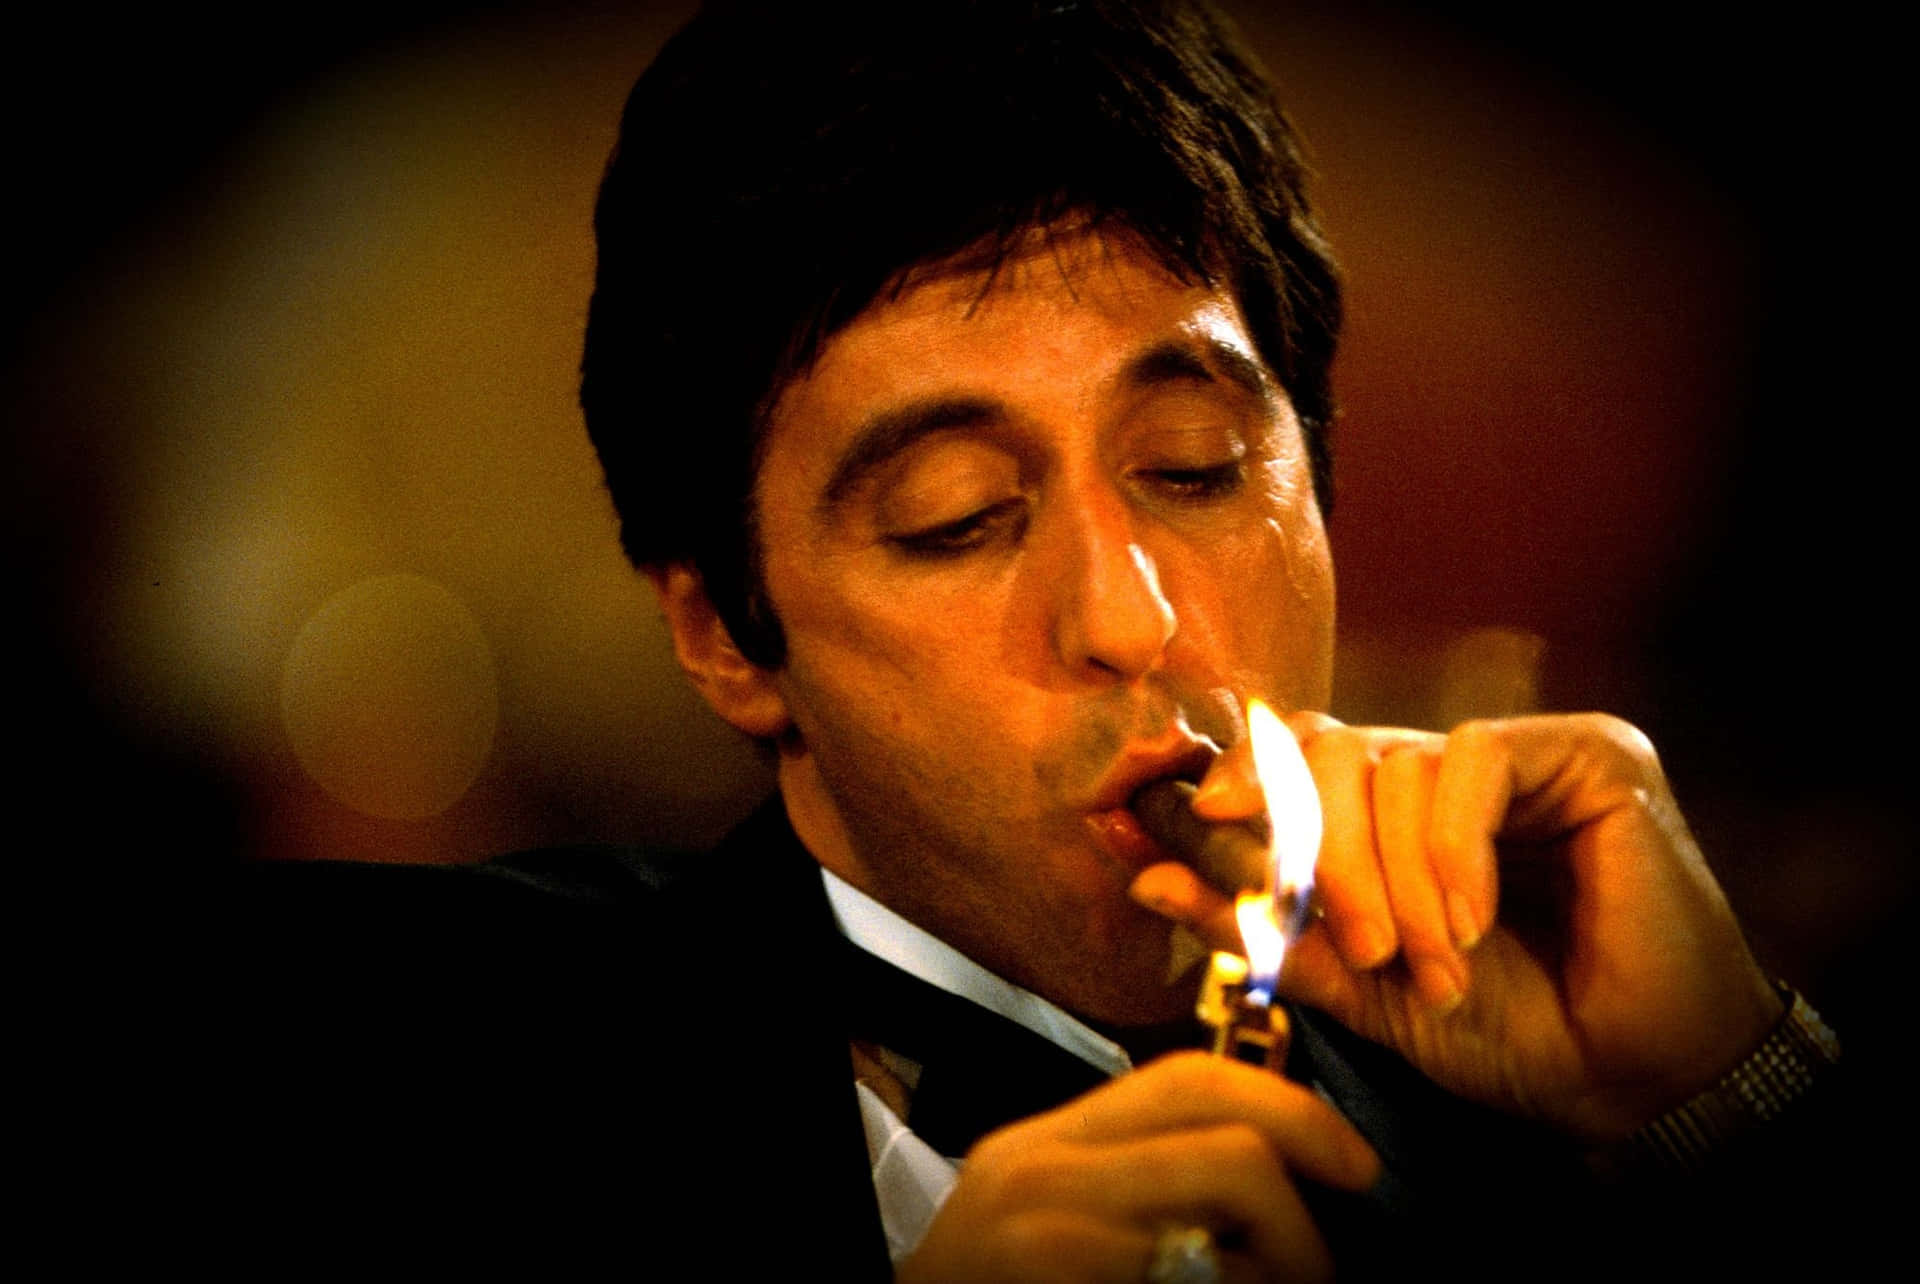 "The World is Yours" - Al Pacino in Scarface